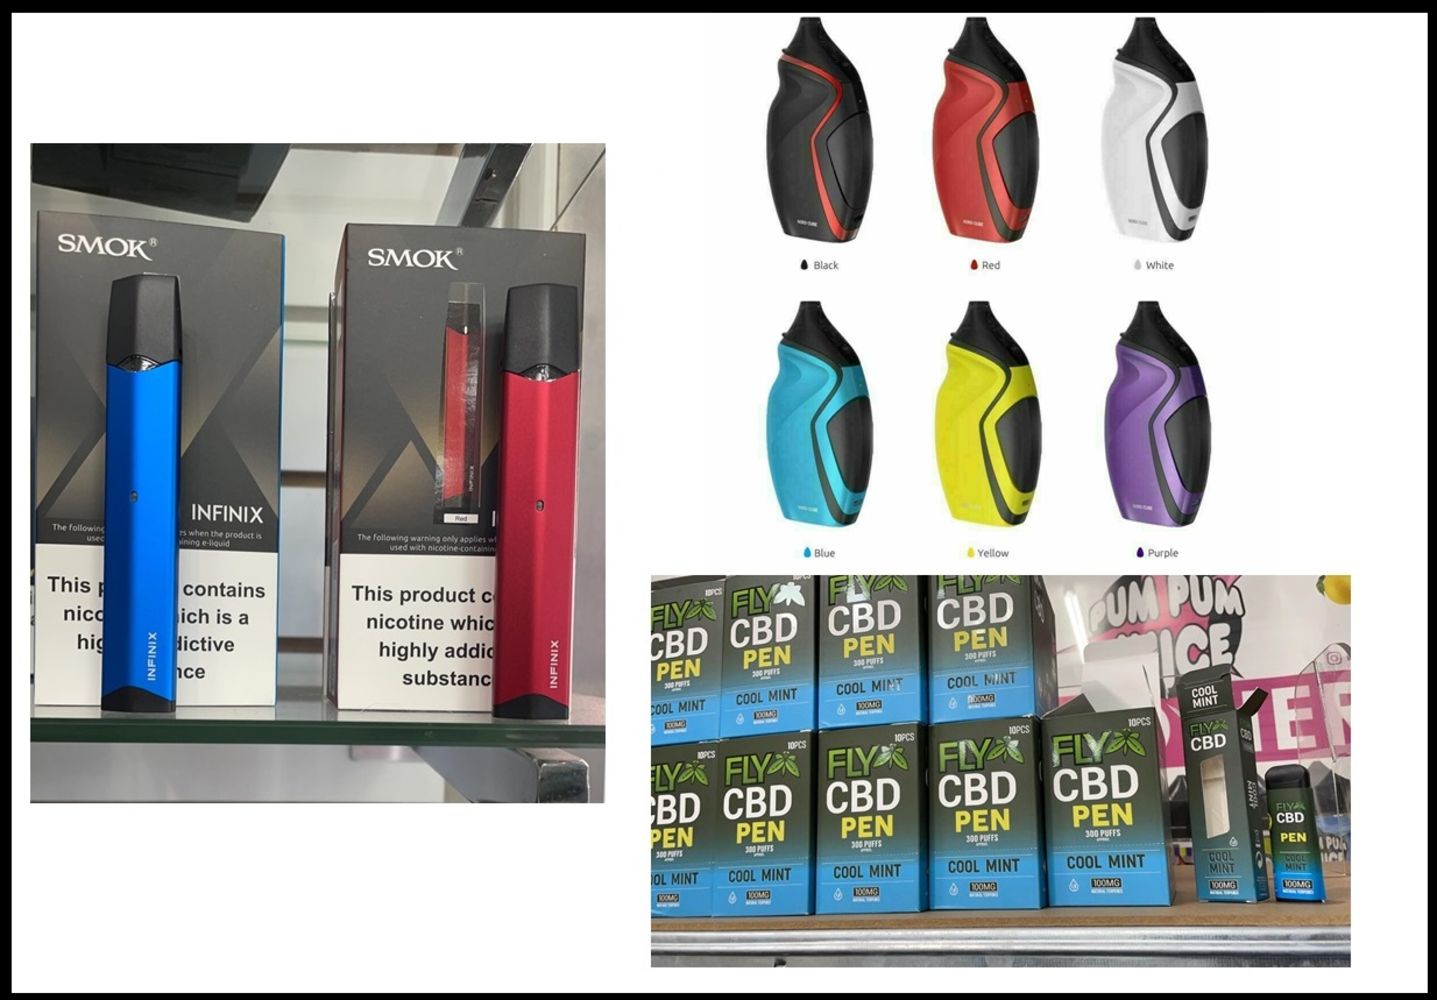 FURTHER REDUCED TO CLEAR - VAPE PRODUCTS. ALL BRAND NEW STOCK. CBD Pens, Smok Infinix Kits, Smok Nord Cube Kits, Over 600 Items